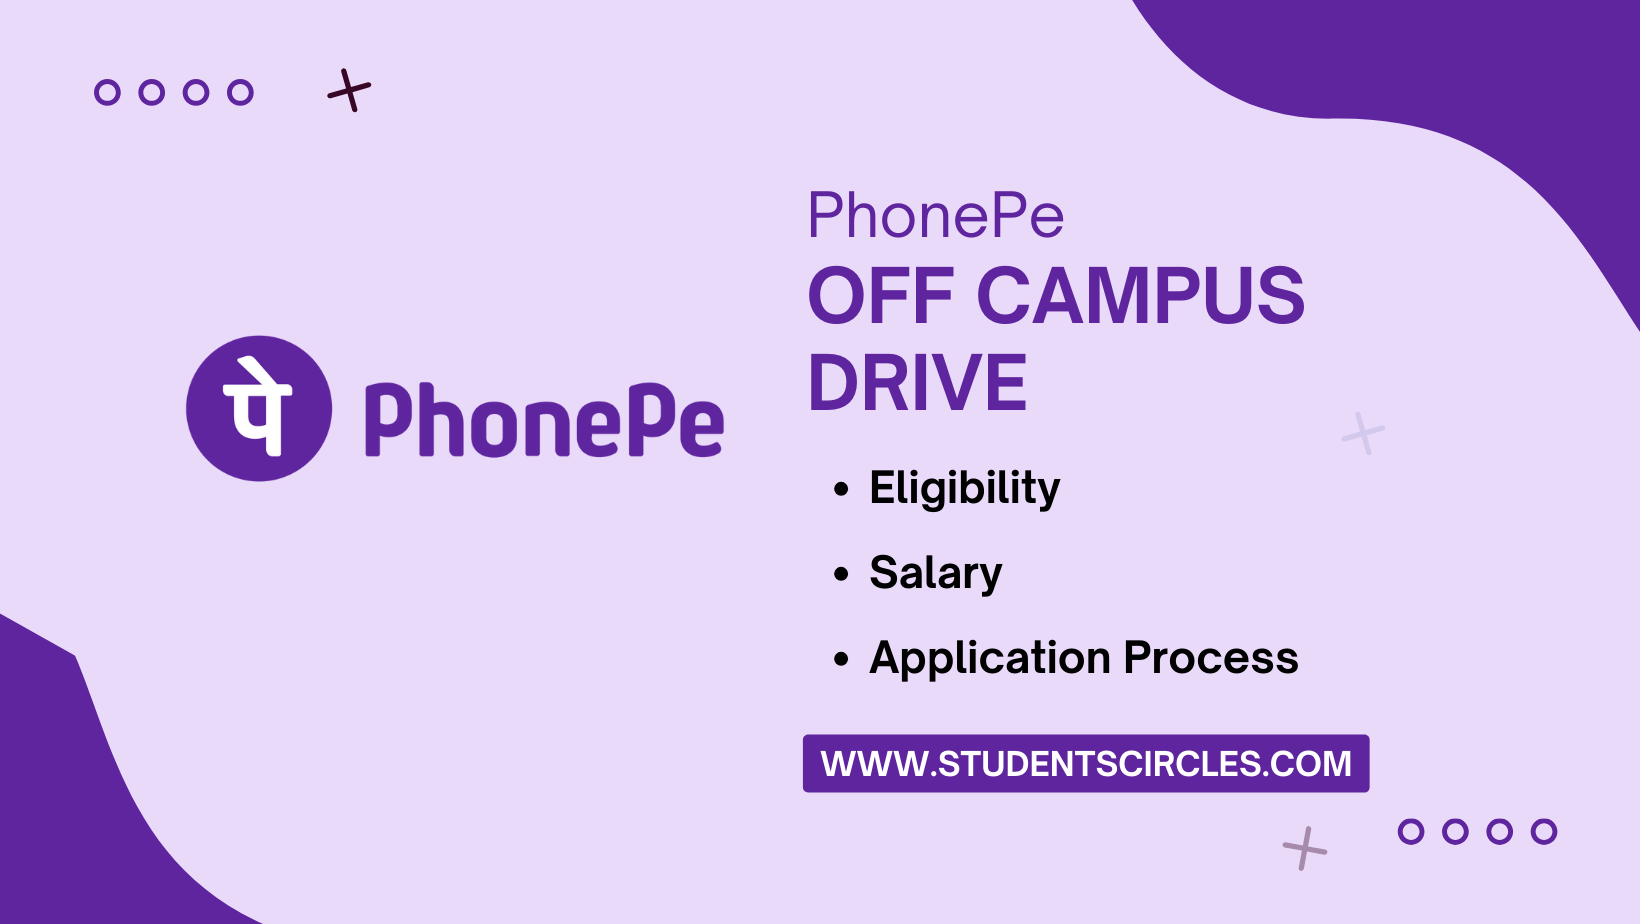 PhonePe Off Campus Drive